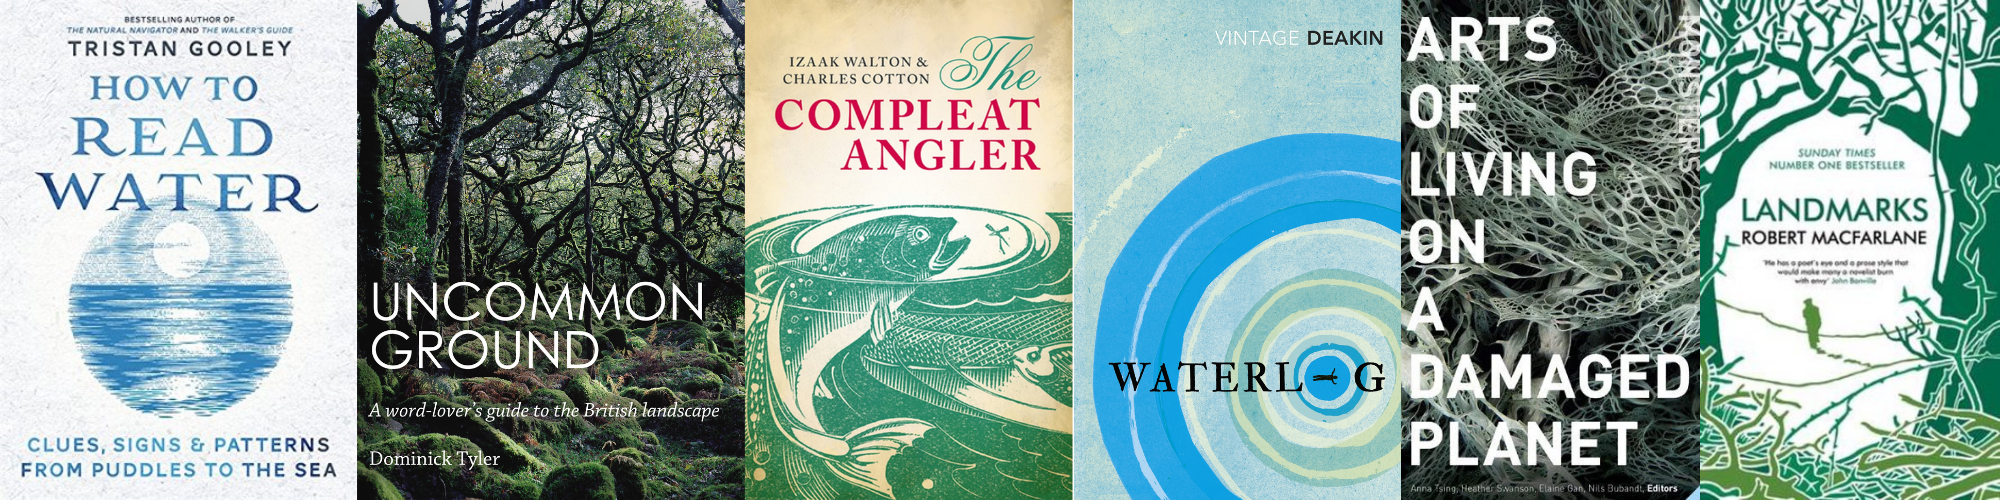 Six book covers. They are for the following books, which are detailed in the page below the image, among others: 'How To Read Water', 'Uncommon Ground', 'The Compleat Angler', 'Waterlog', 'Arts Of Living On A Damaged Planet', and 'Landmarks'.